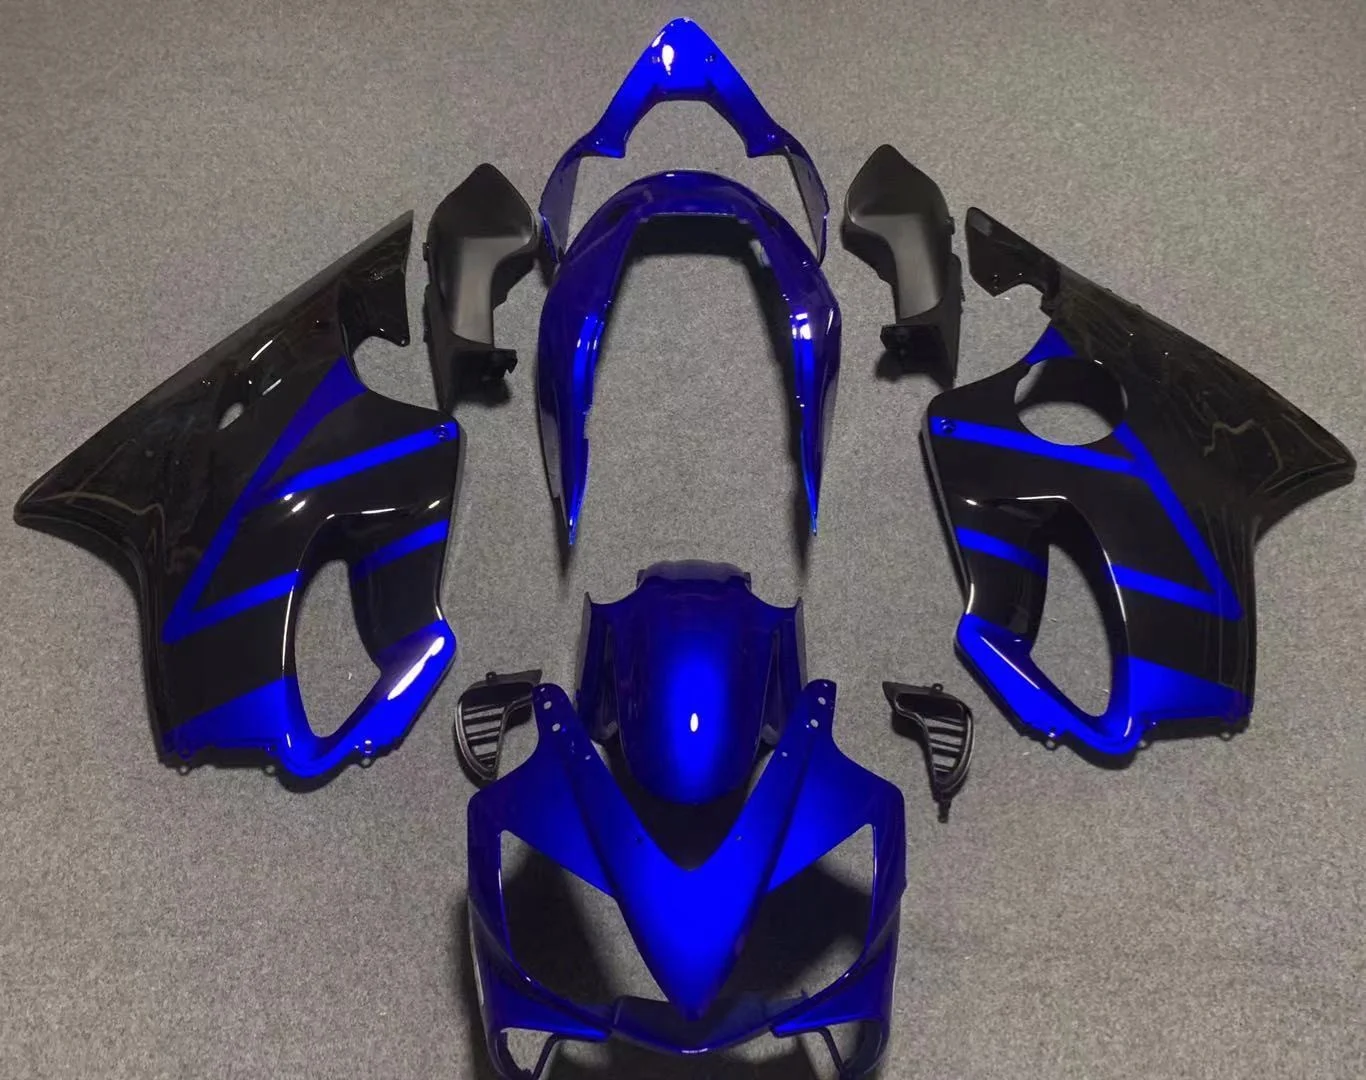 

2022 WHSC Blue And Black Motorcycle Fairings Fit For HONDA CBR600 2004-2007, Pictures shown